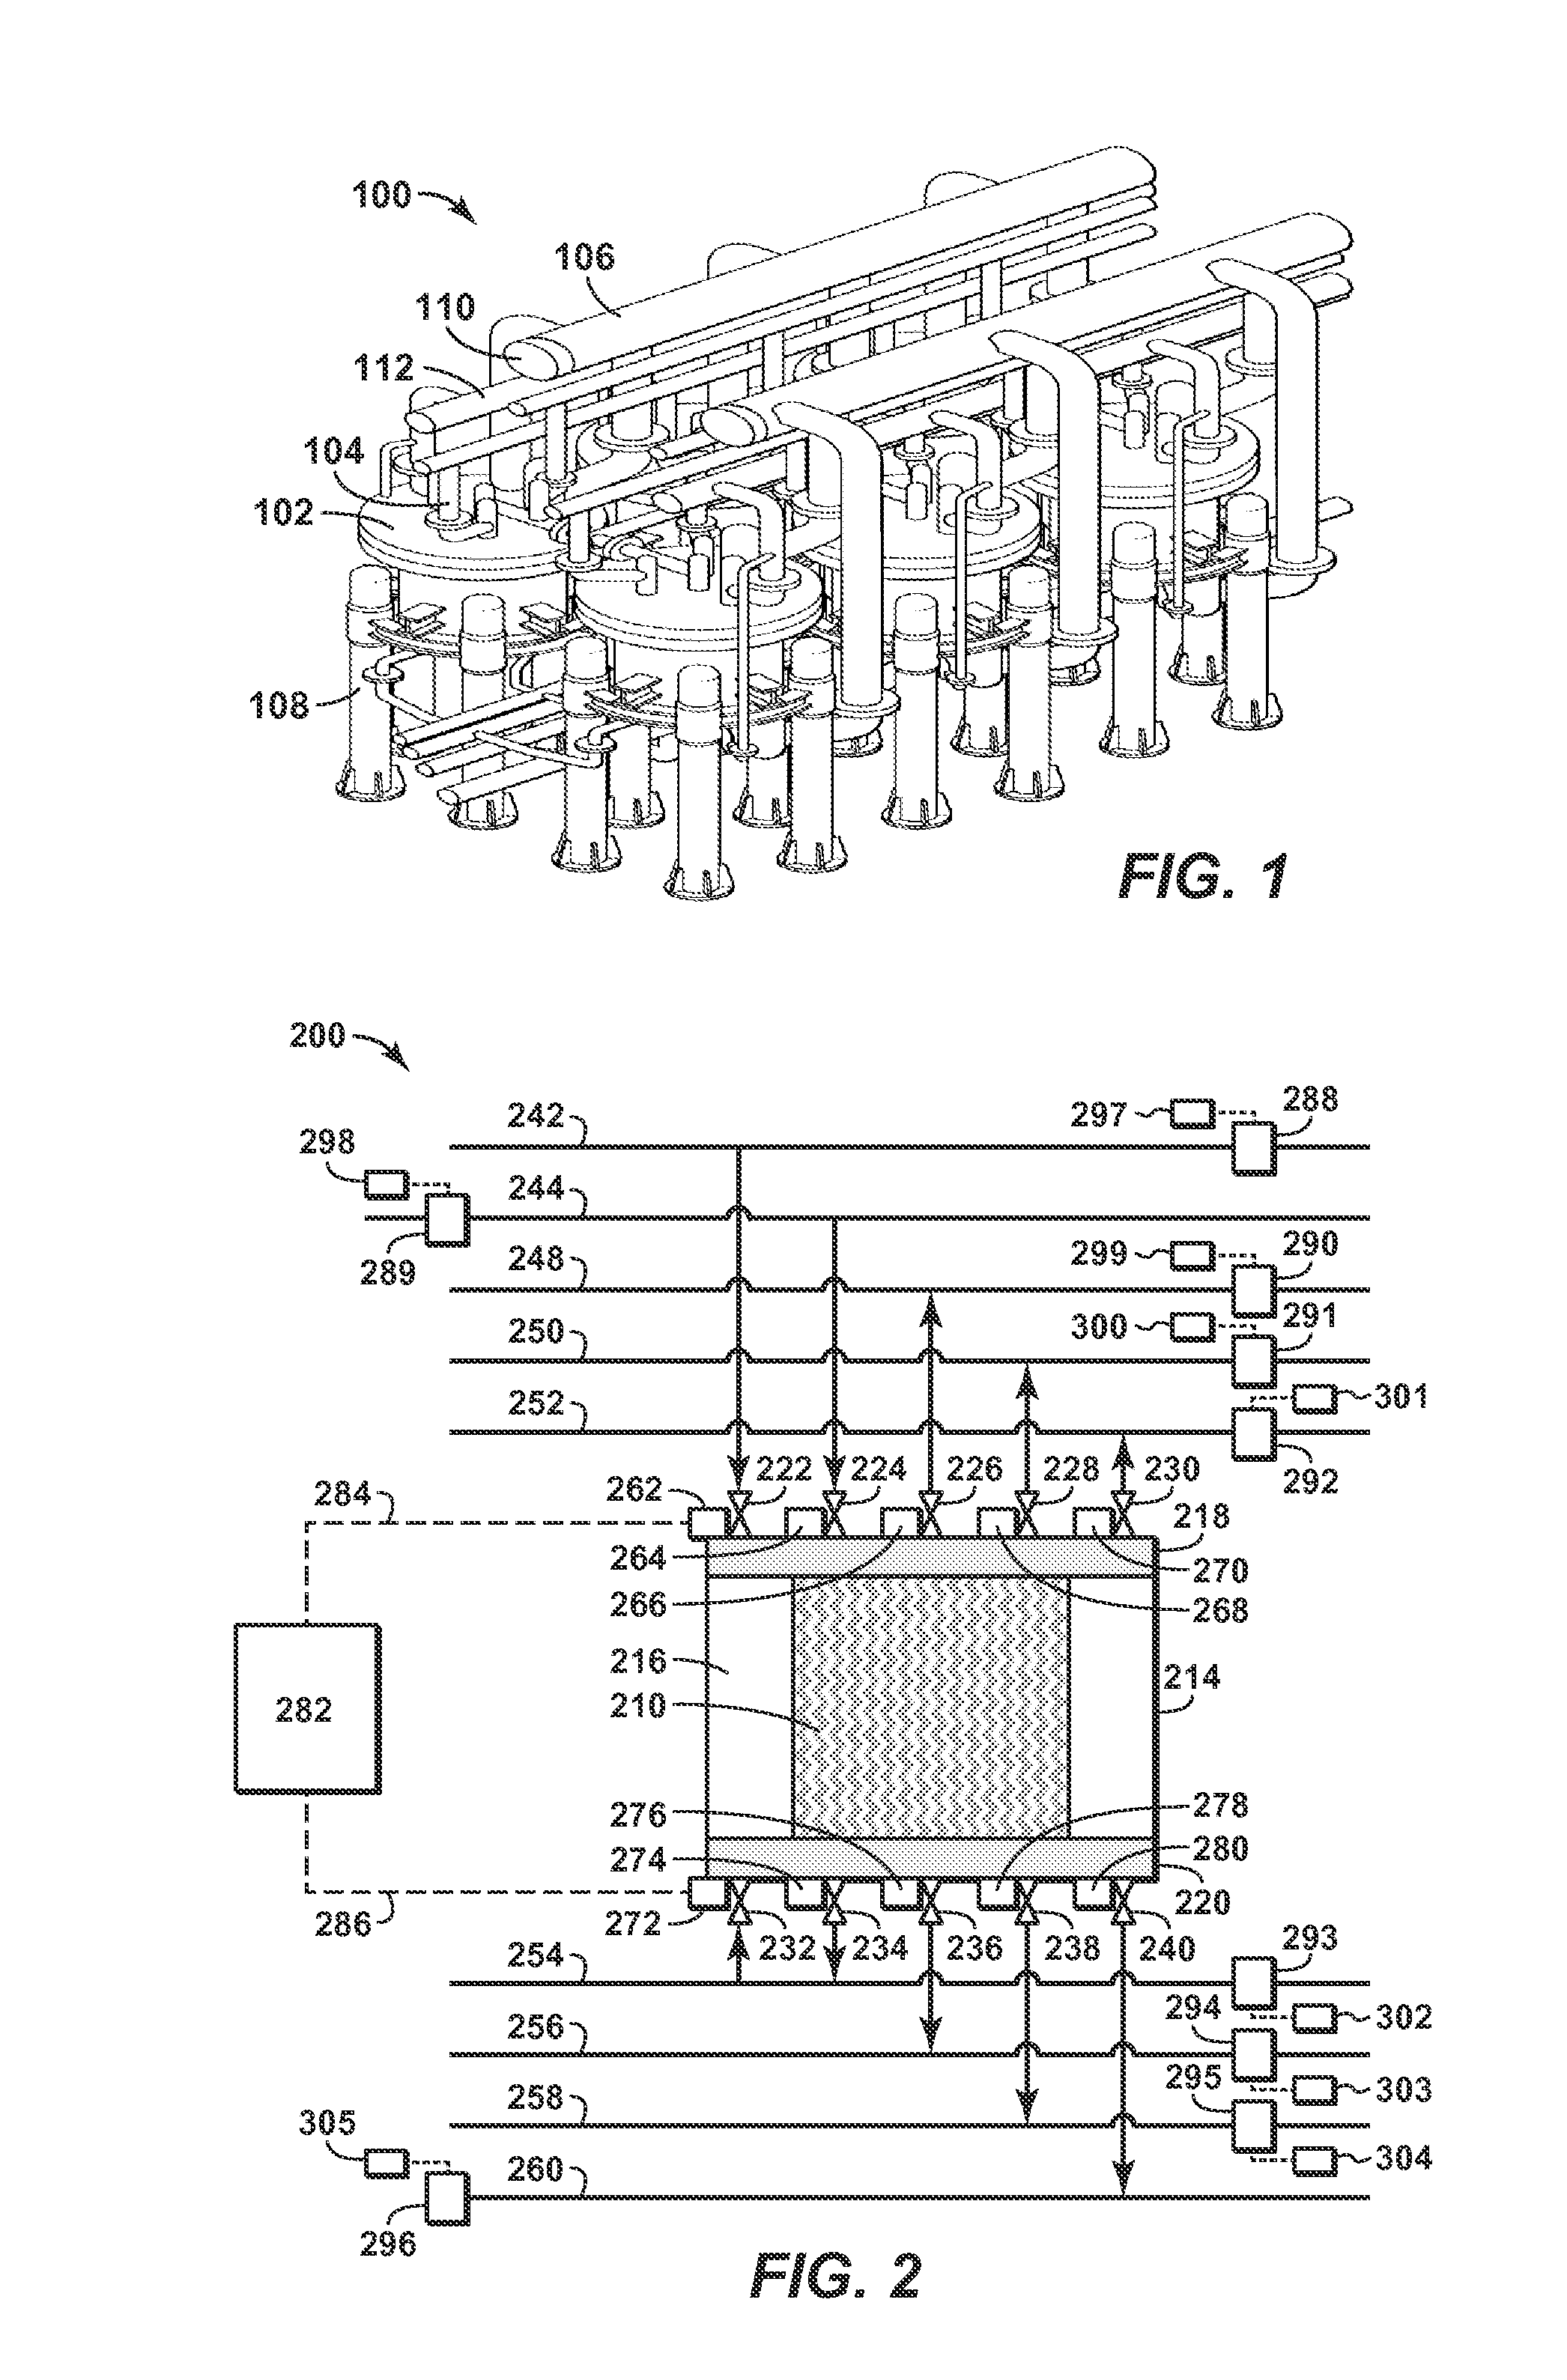 Apparatus and System Having a Valve Assembly and Swing Adsorption Processes Related Thereto